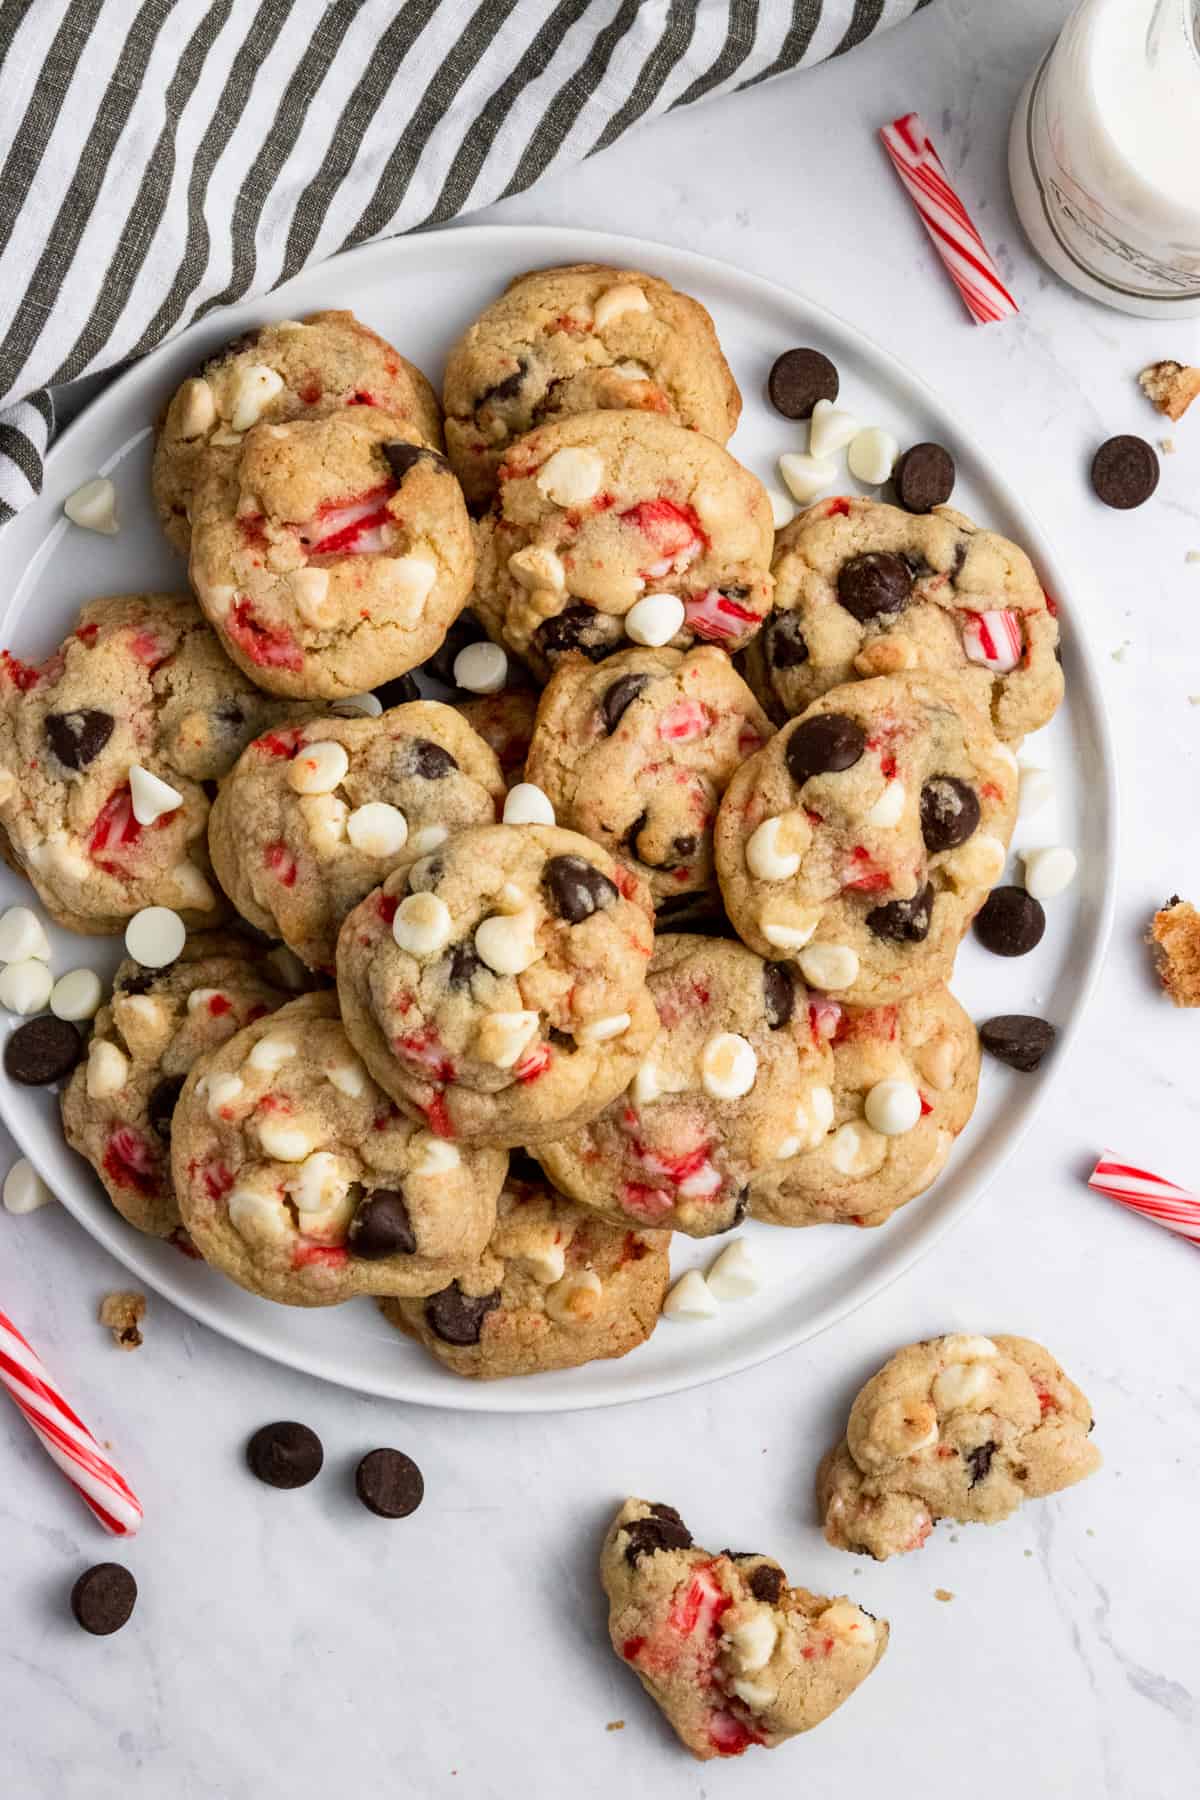 Cookies on plate with candy canes and milk.